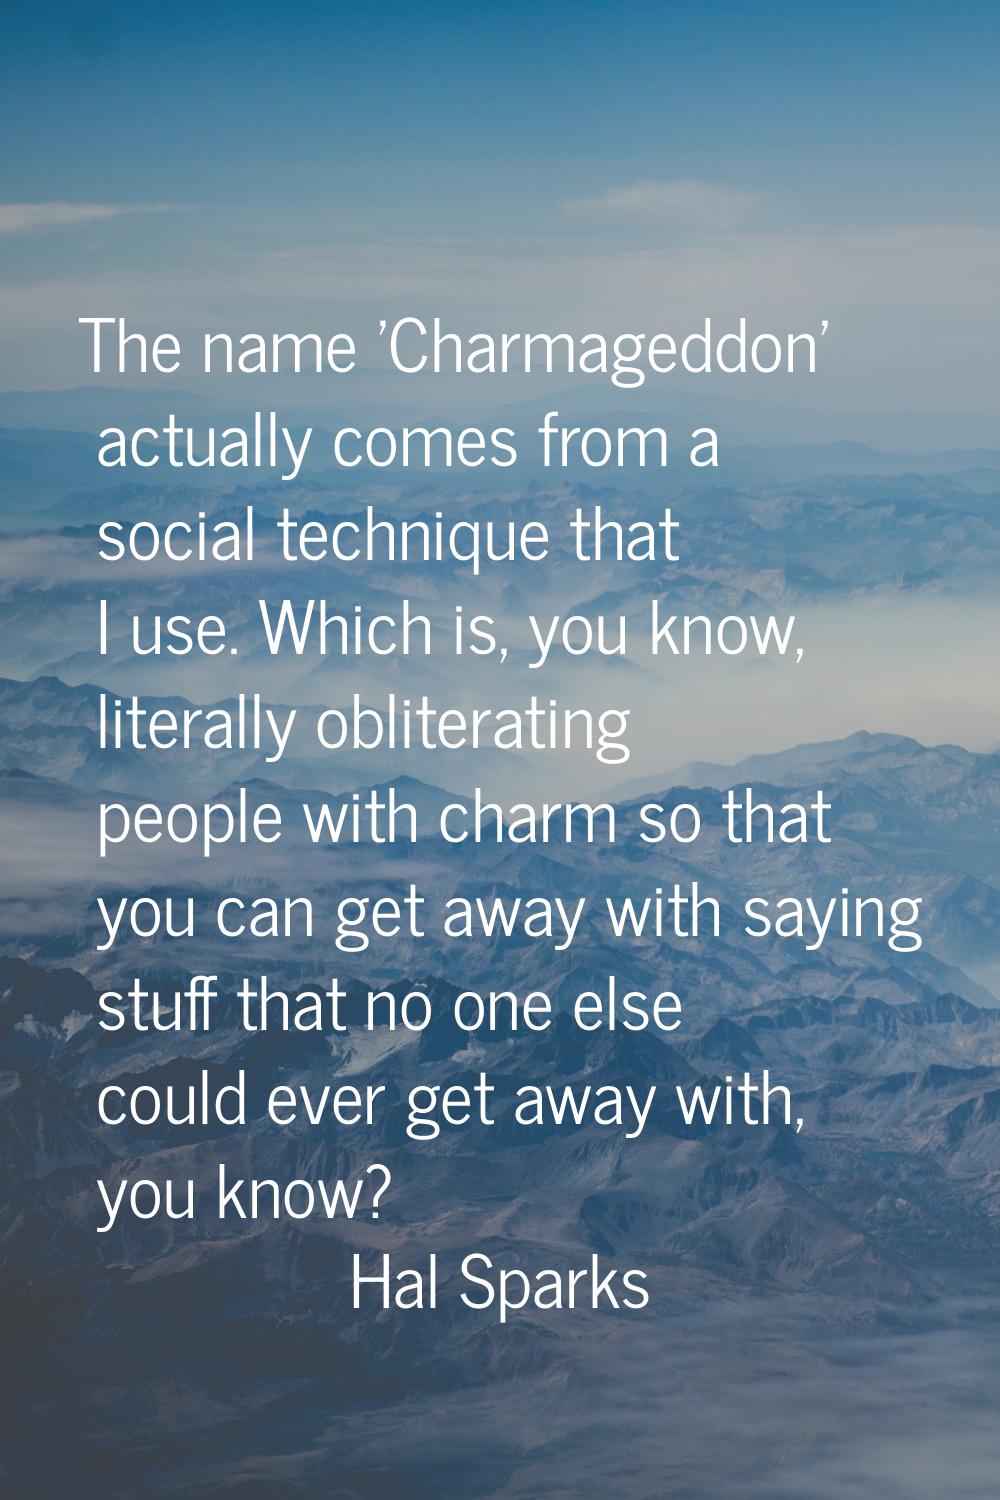 The name 'Charmageddon' actually comes from a social technique that I use. Which is, you know, lite